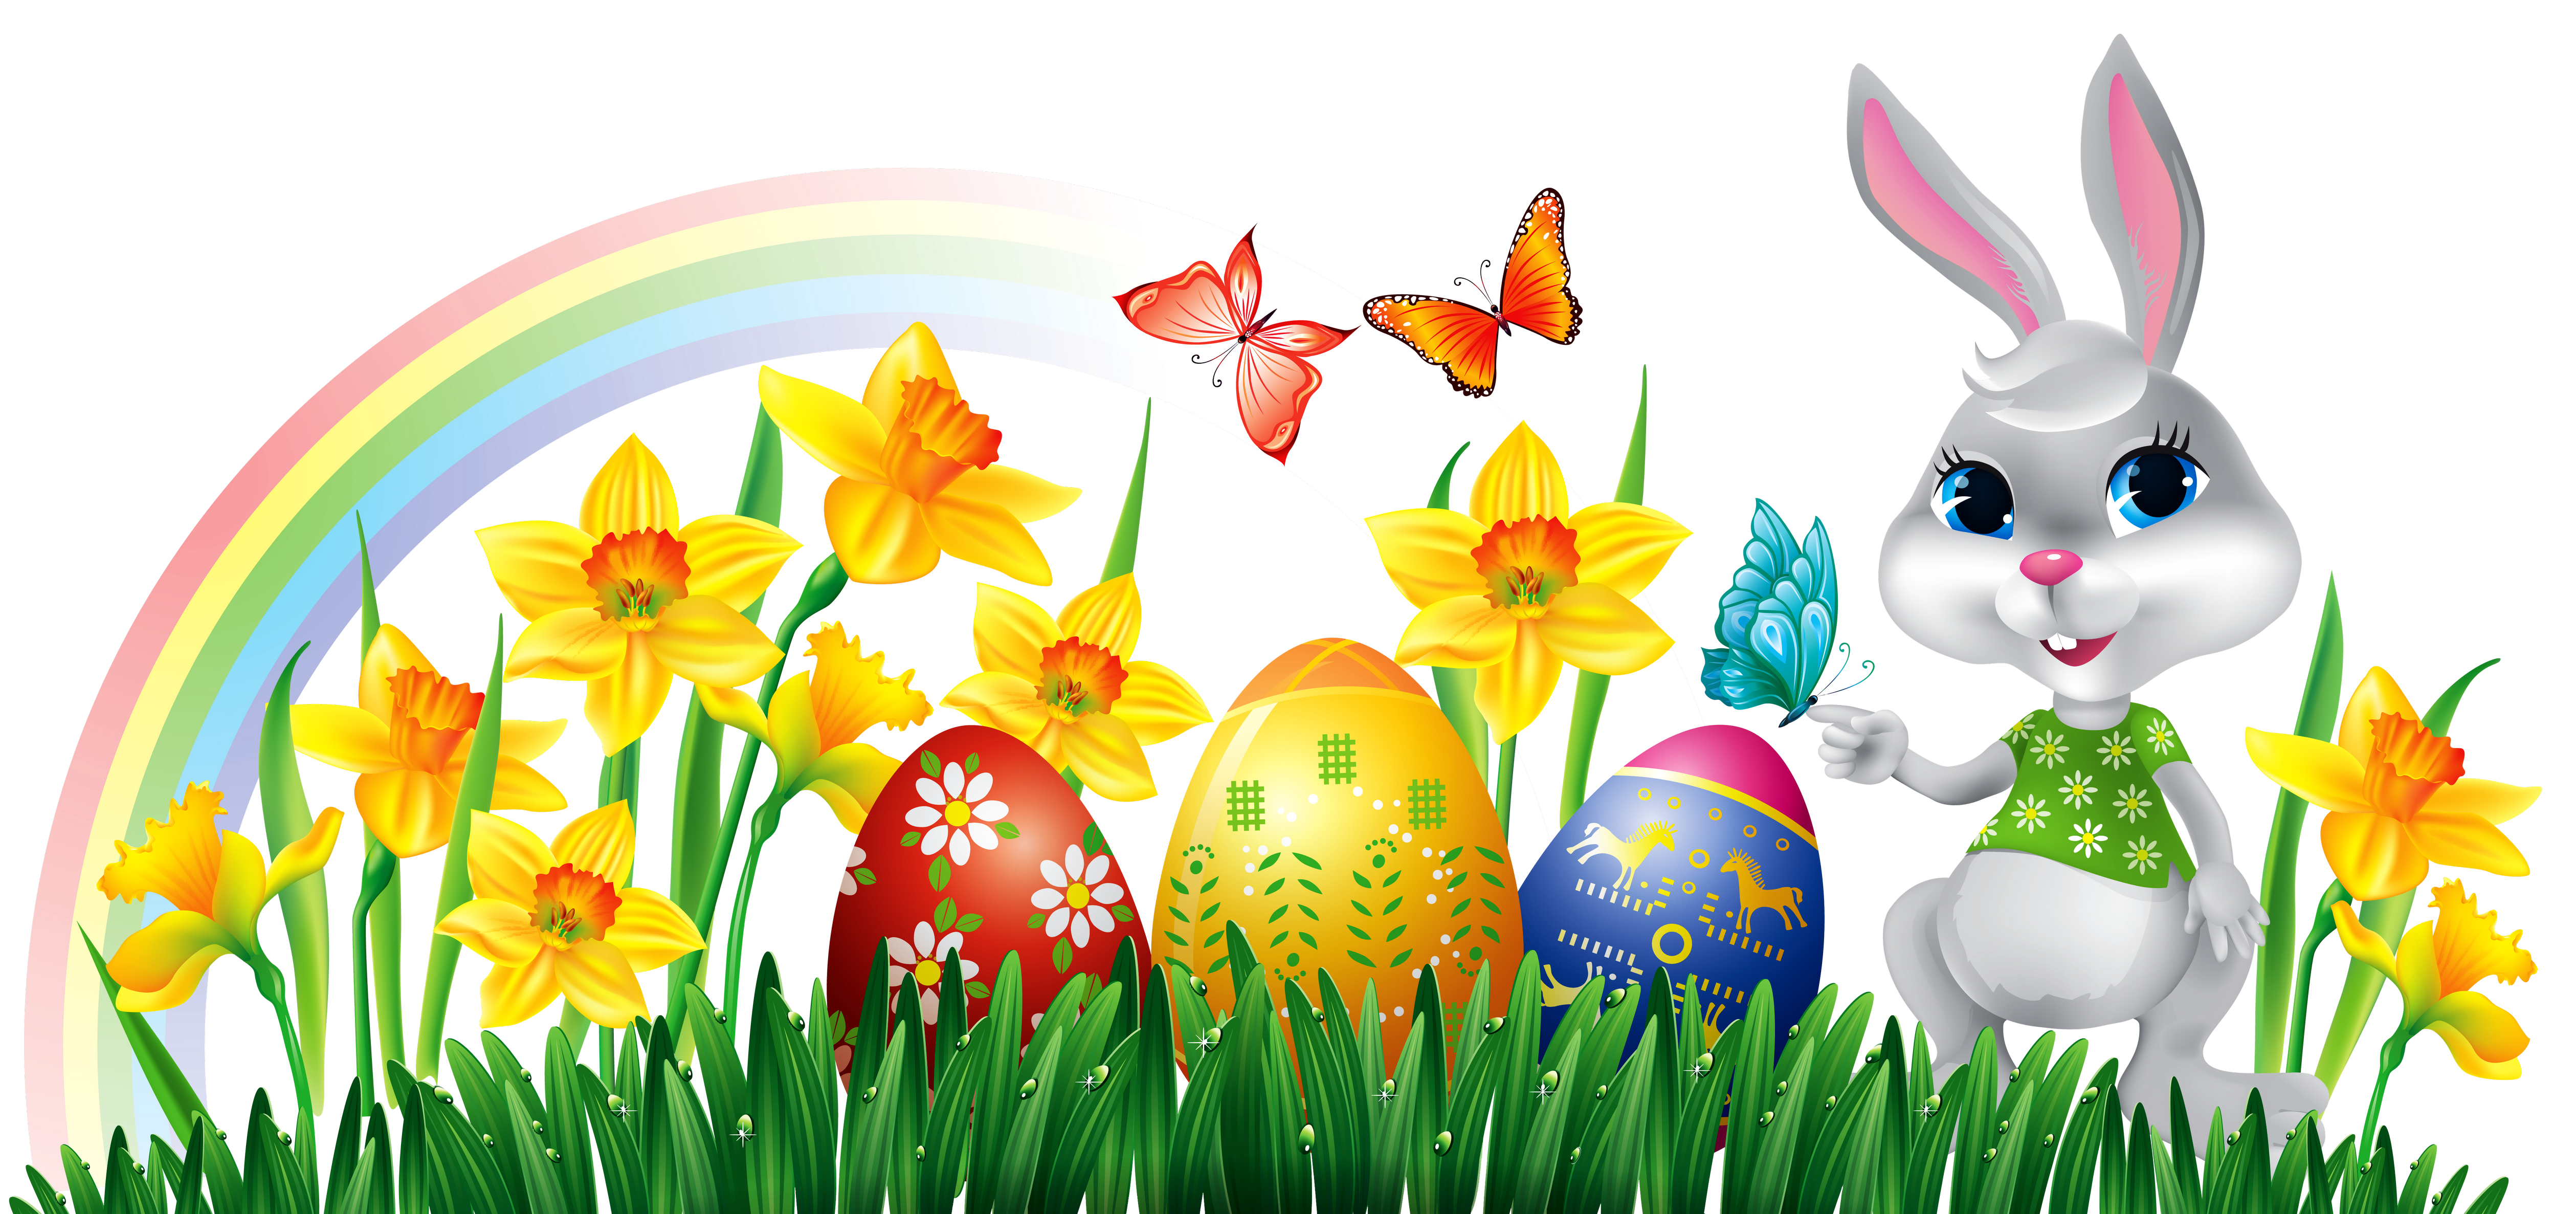 Free Easter Bunny Images, Download Free Easter Bunny Images png images